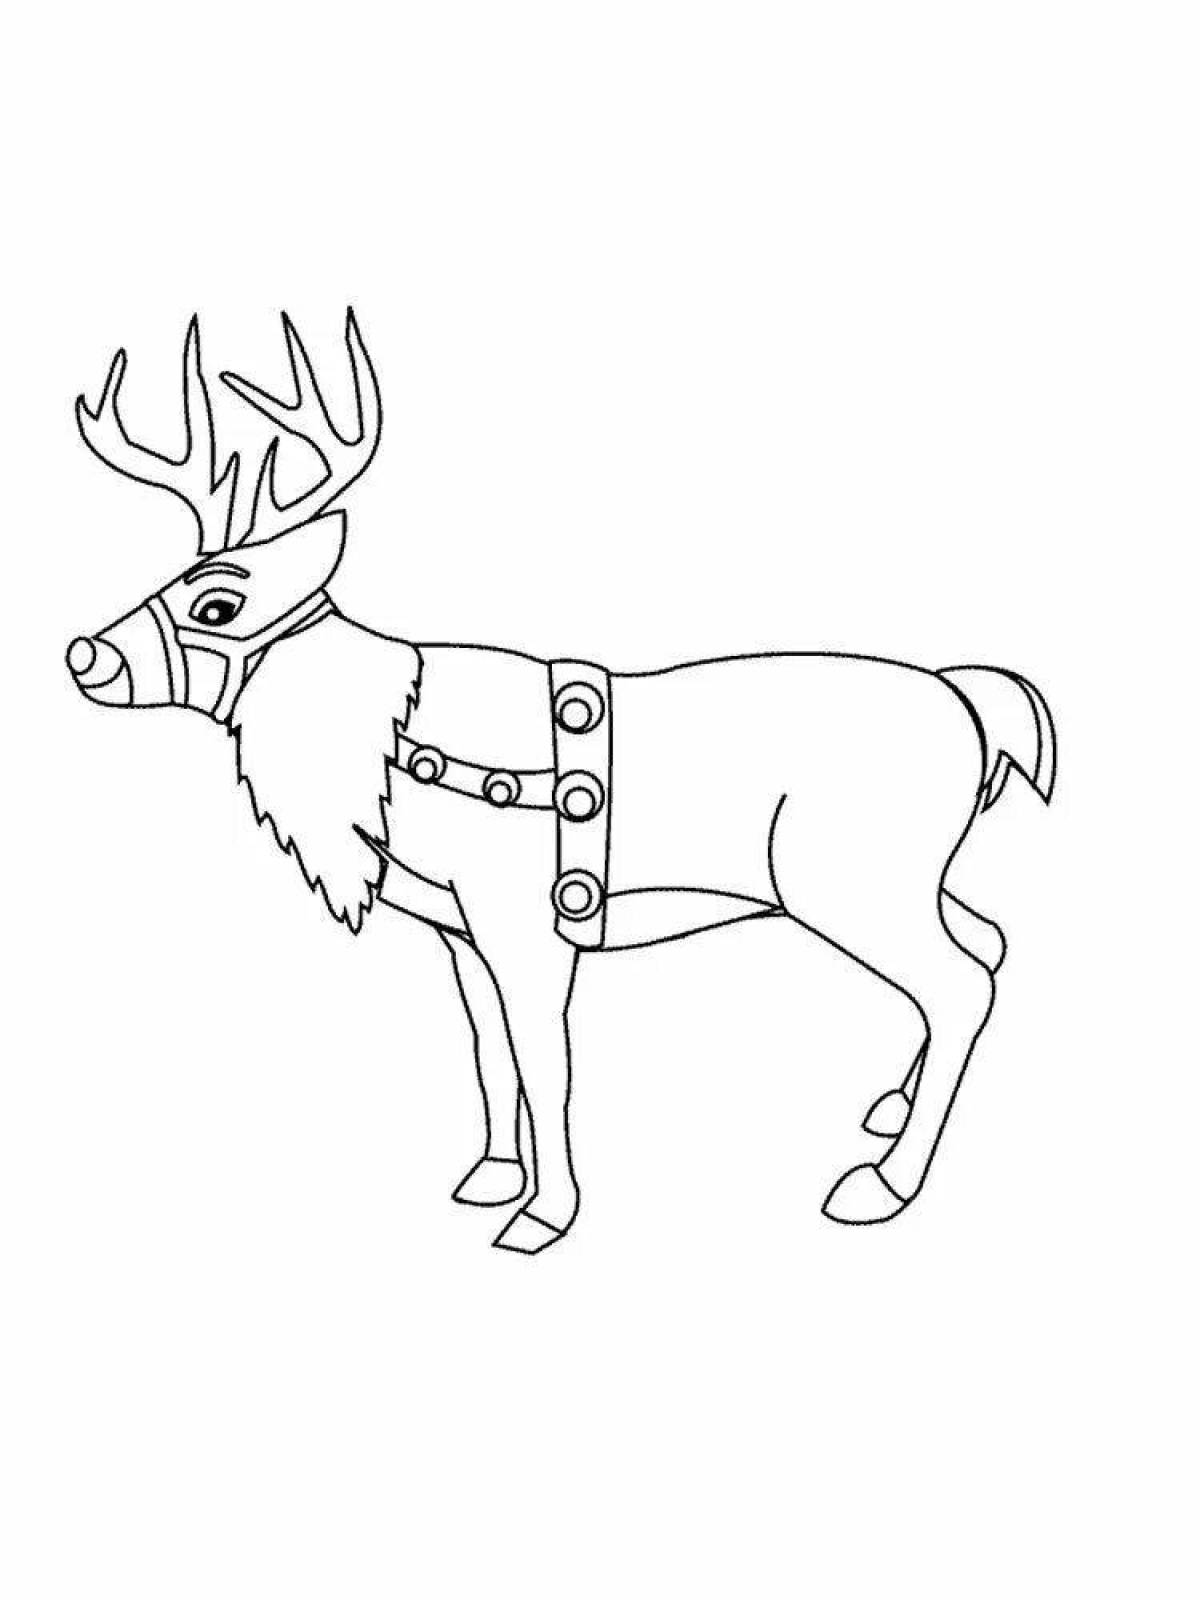 Animated reindeer coloring page